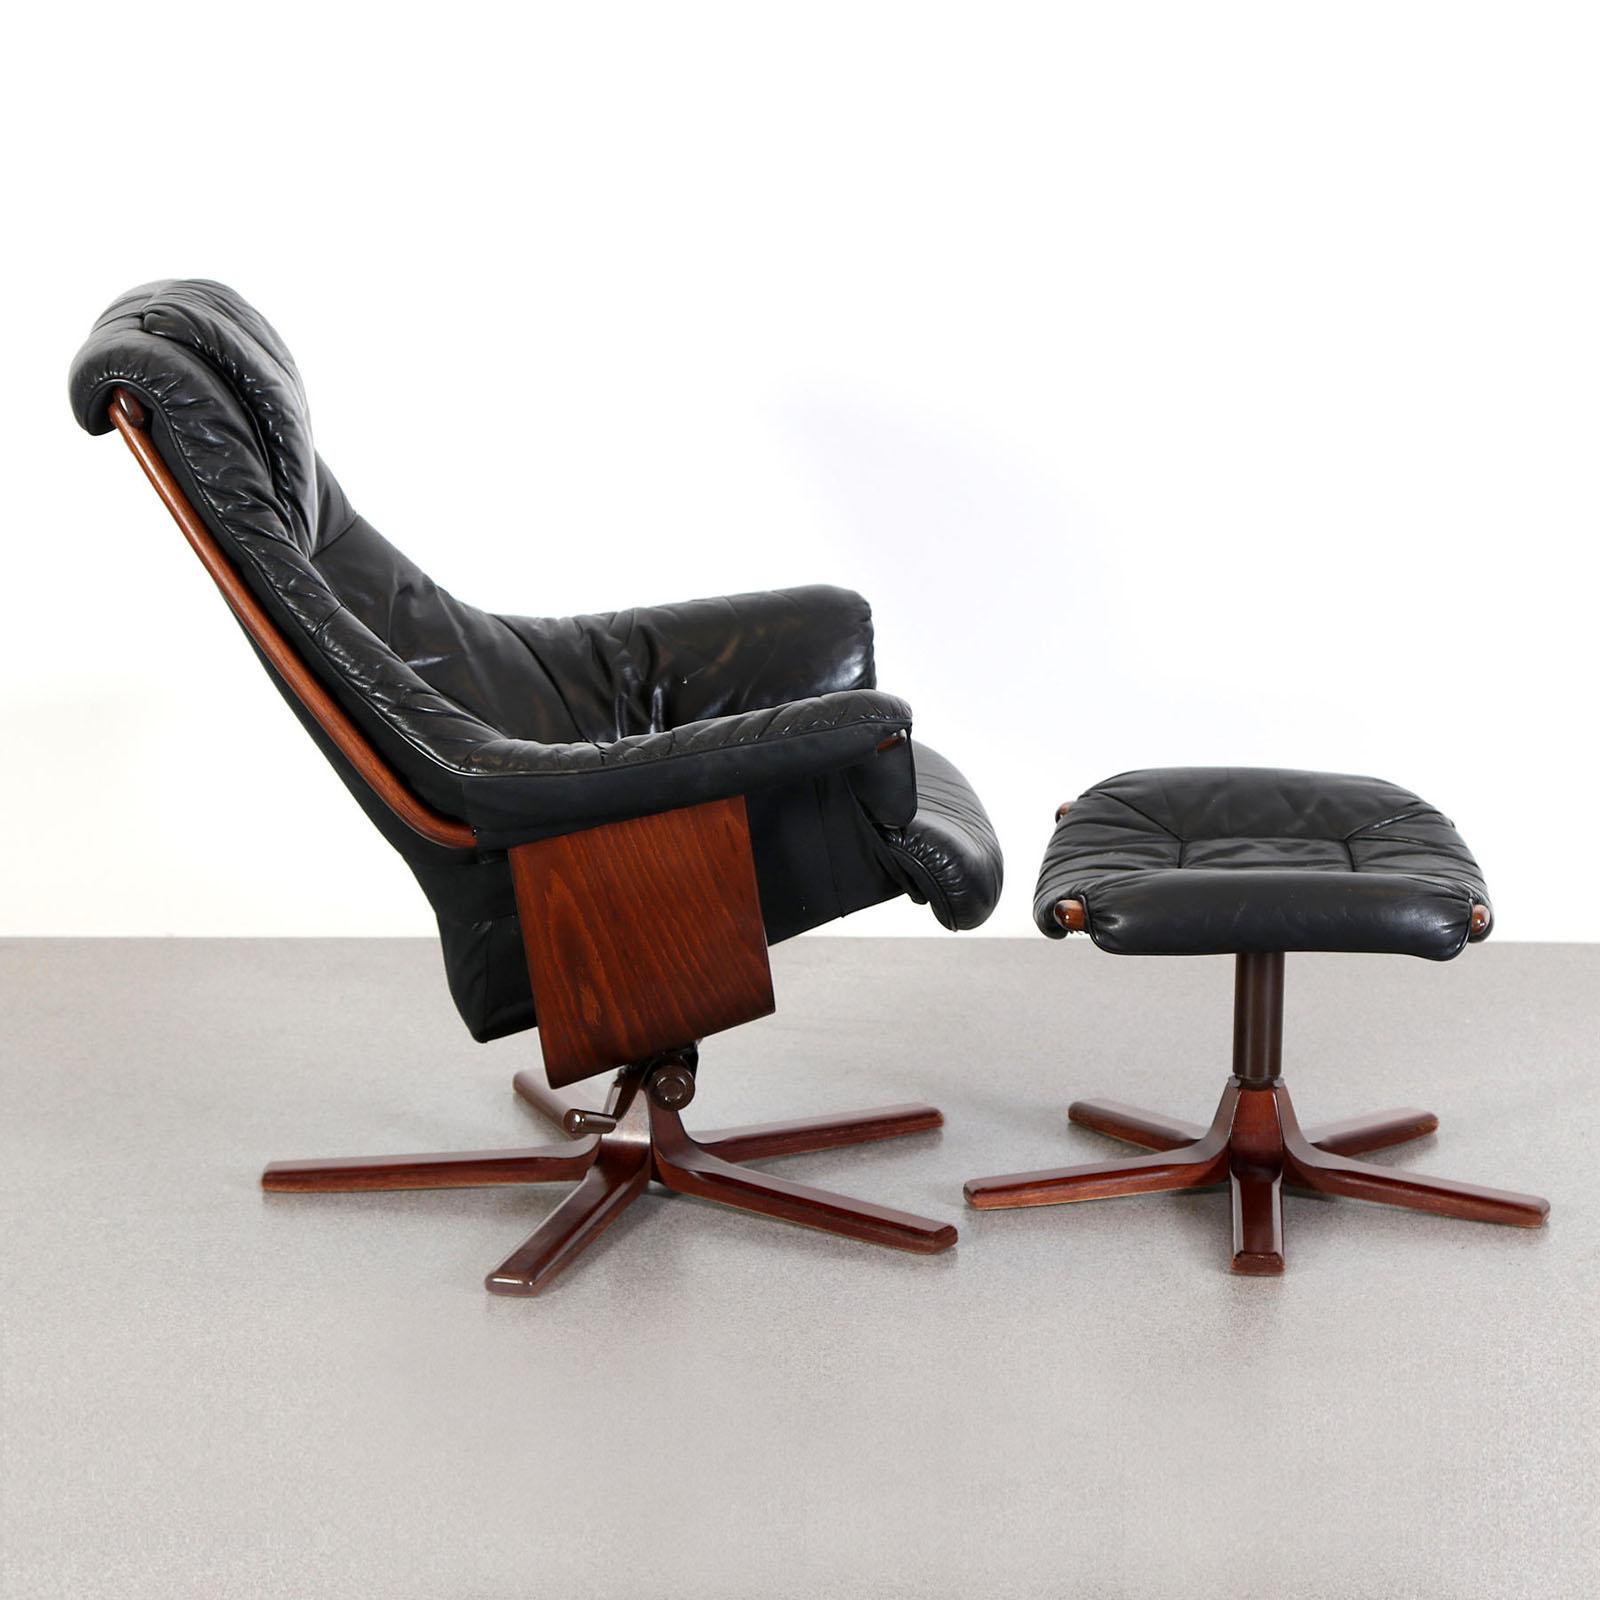 Göte Möbel Swivel armchair with footrest, Sweden, 1970s
Swivel armchair with footrest, stained beech with black leather upholstery. The seat is rotatable and in upward position adjustable. Original manufacturer label, marked under the bottom. Very